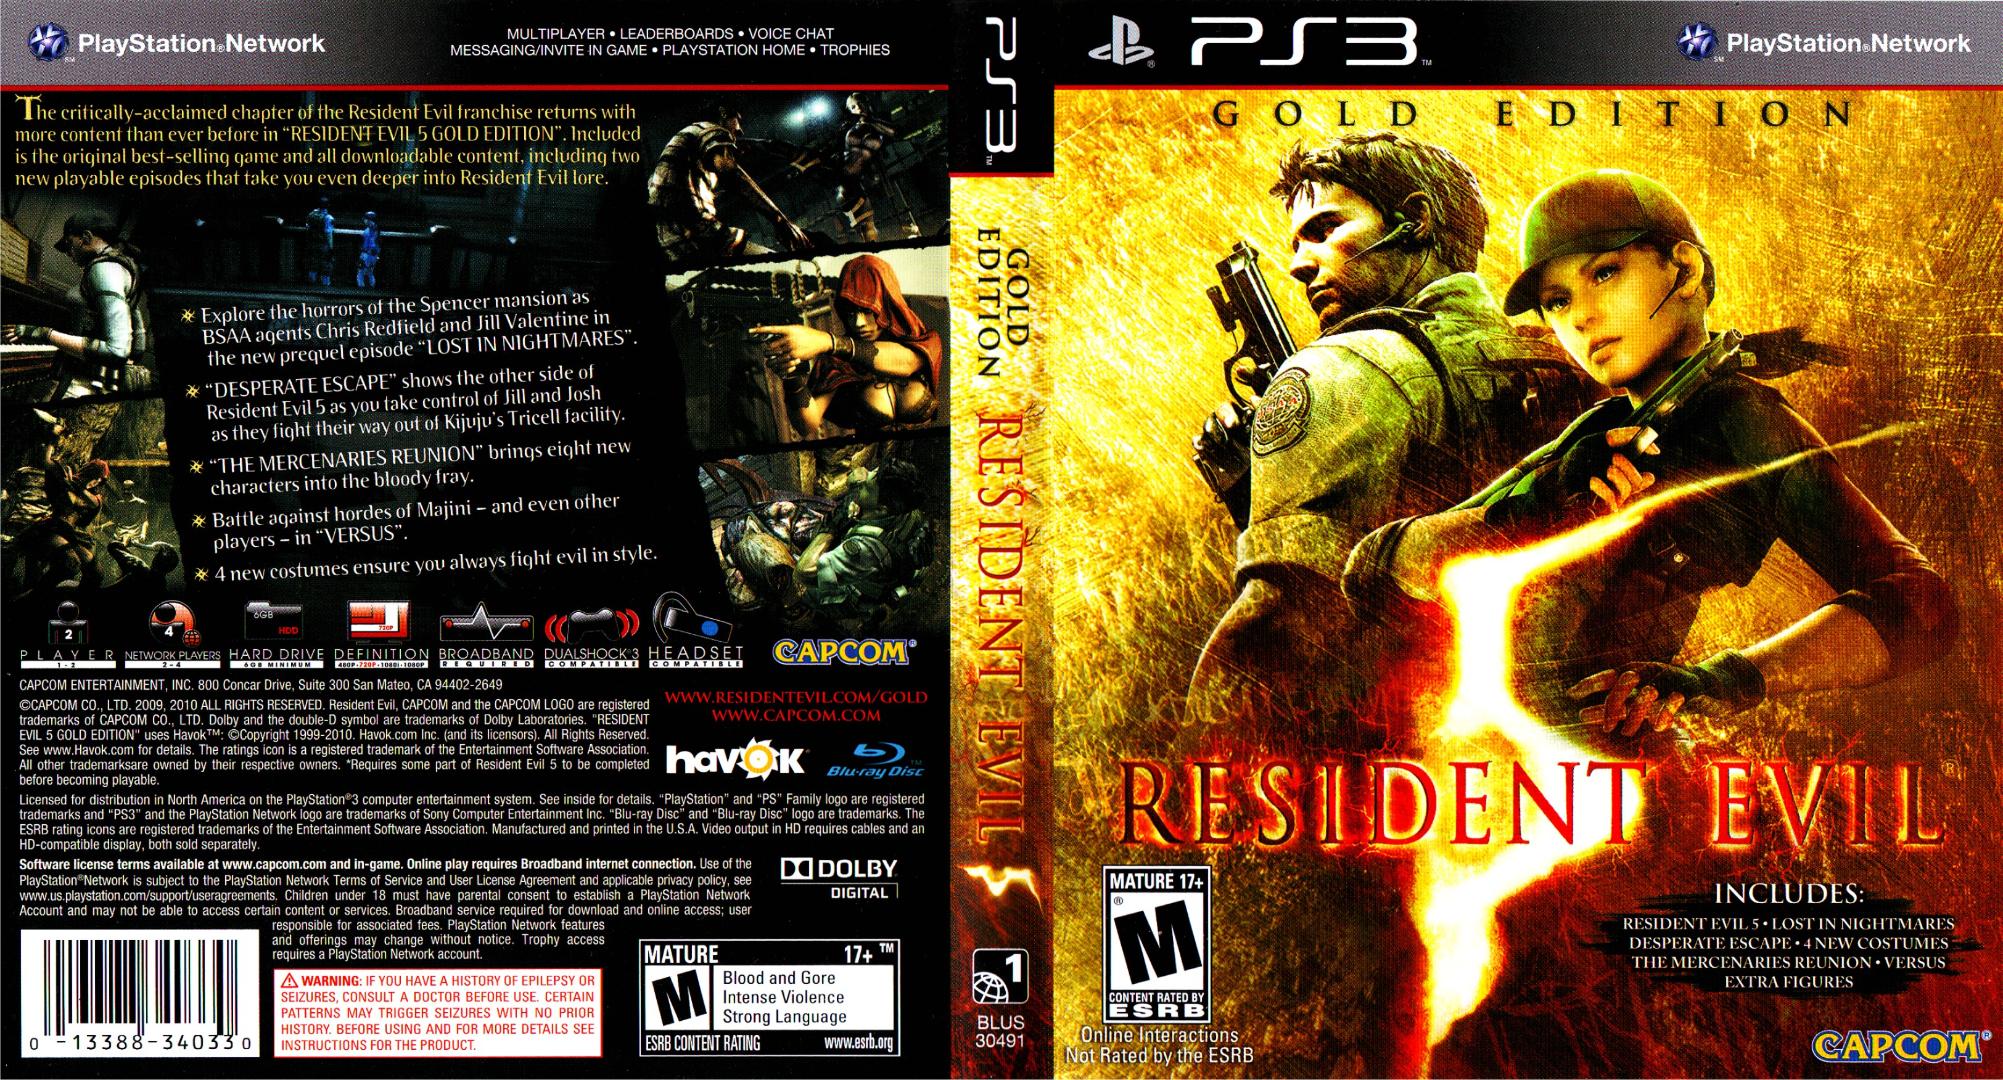 Ps3 игры 5. Resident Evil 5 Gold Edition ps3 обложка. Resident Evil 5 ps3 обложка. Resident Evil ps3 диск. Resident Evil игра на ps3.